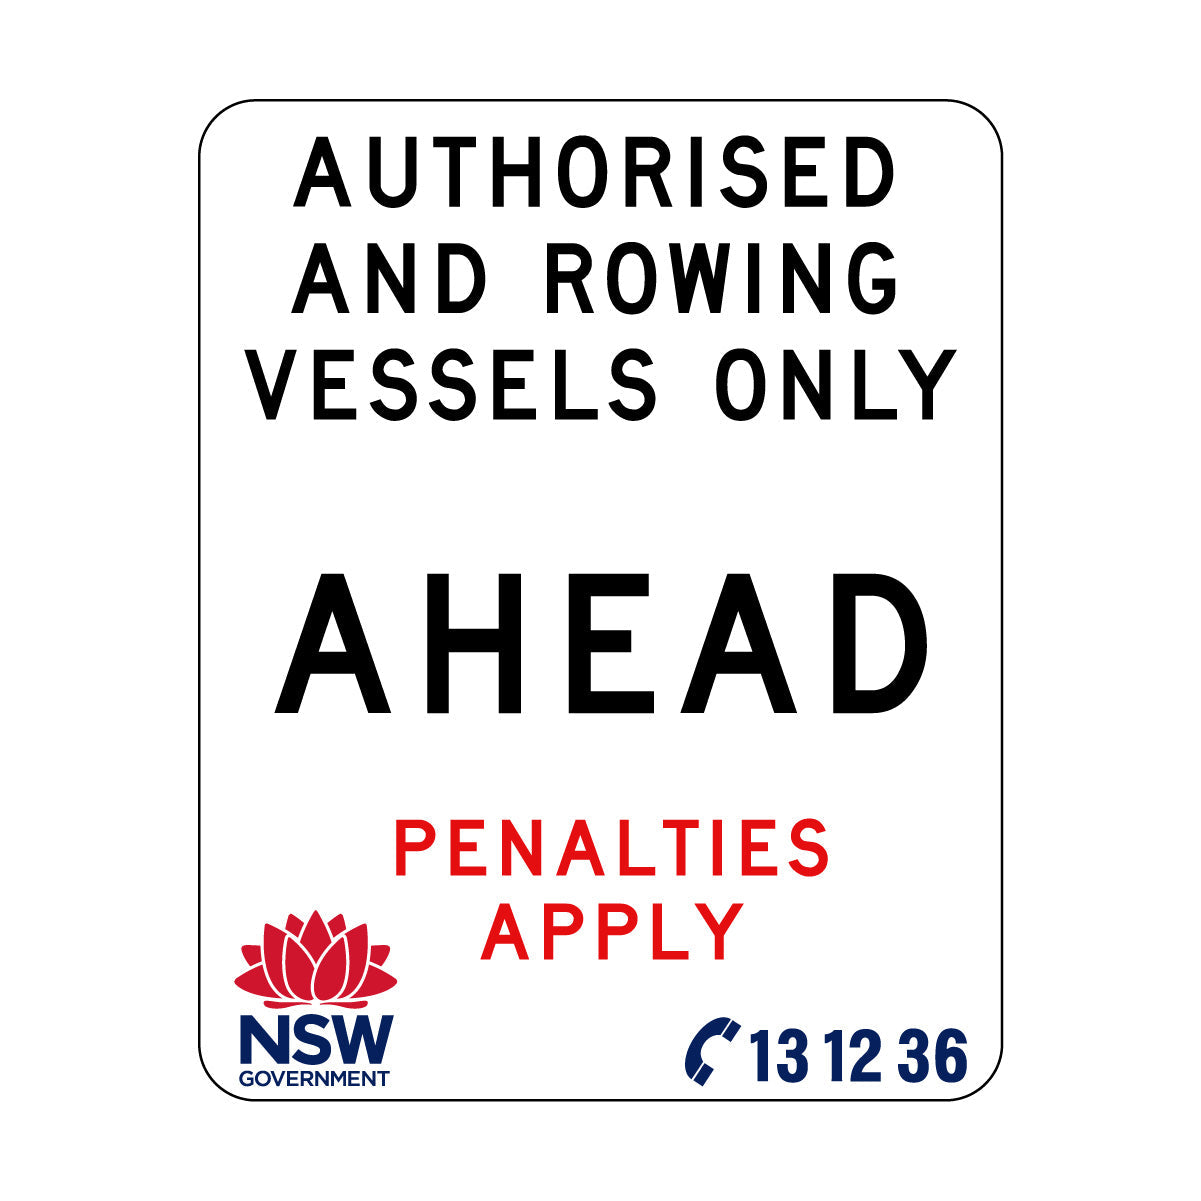 Authorised and Rowing Vessels Only